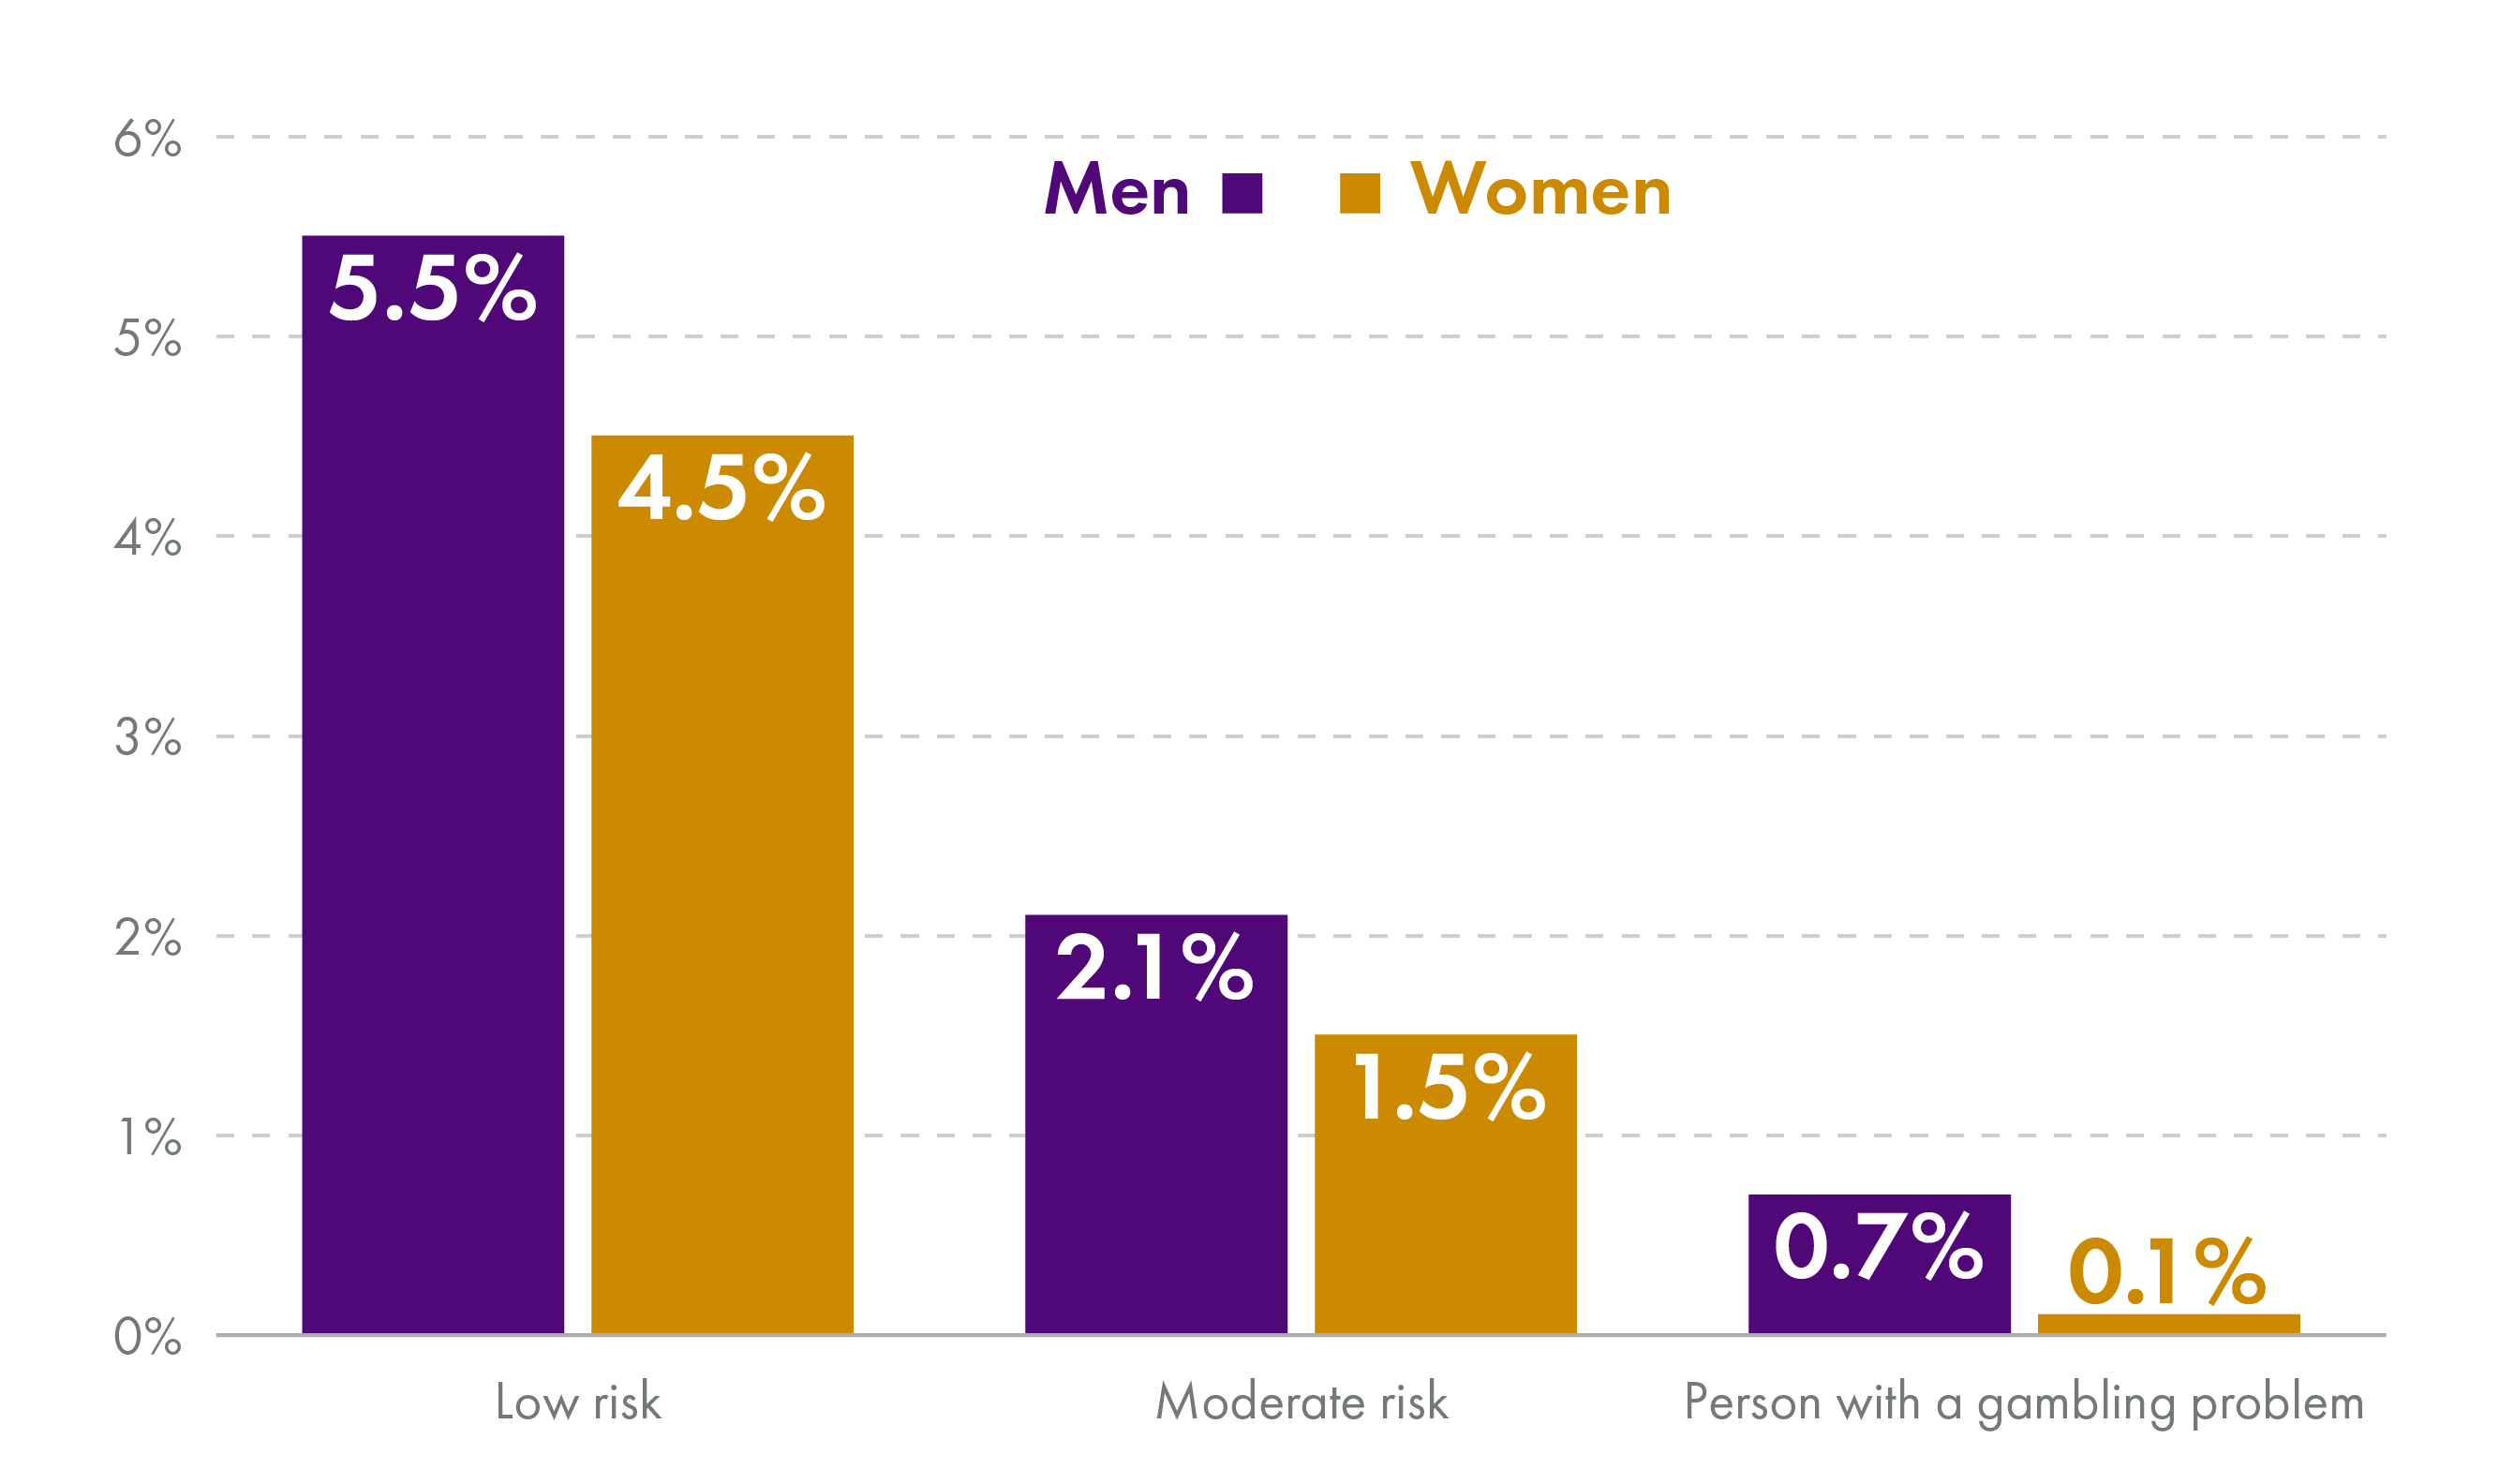 Bar chart showing the estimated proportion of men and women who are at risk of or have a gambling problem. For all categories (moderate risk, low risk and person with a gambling problem), a higher proportion of men than women fall into the category.